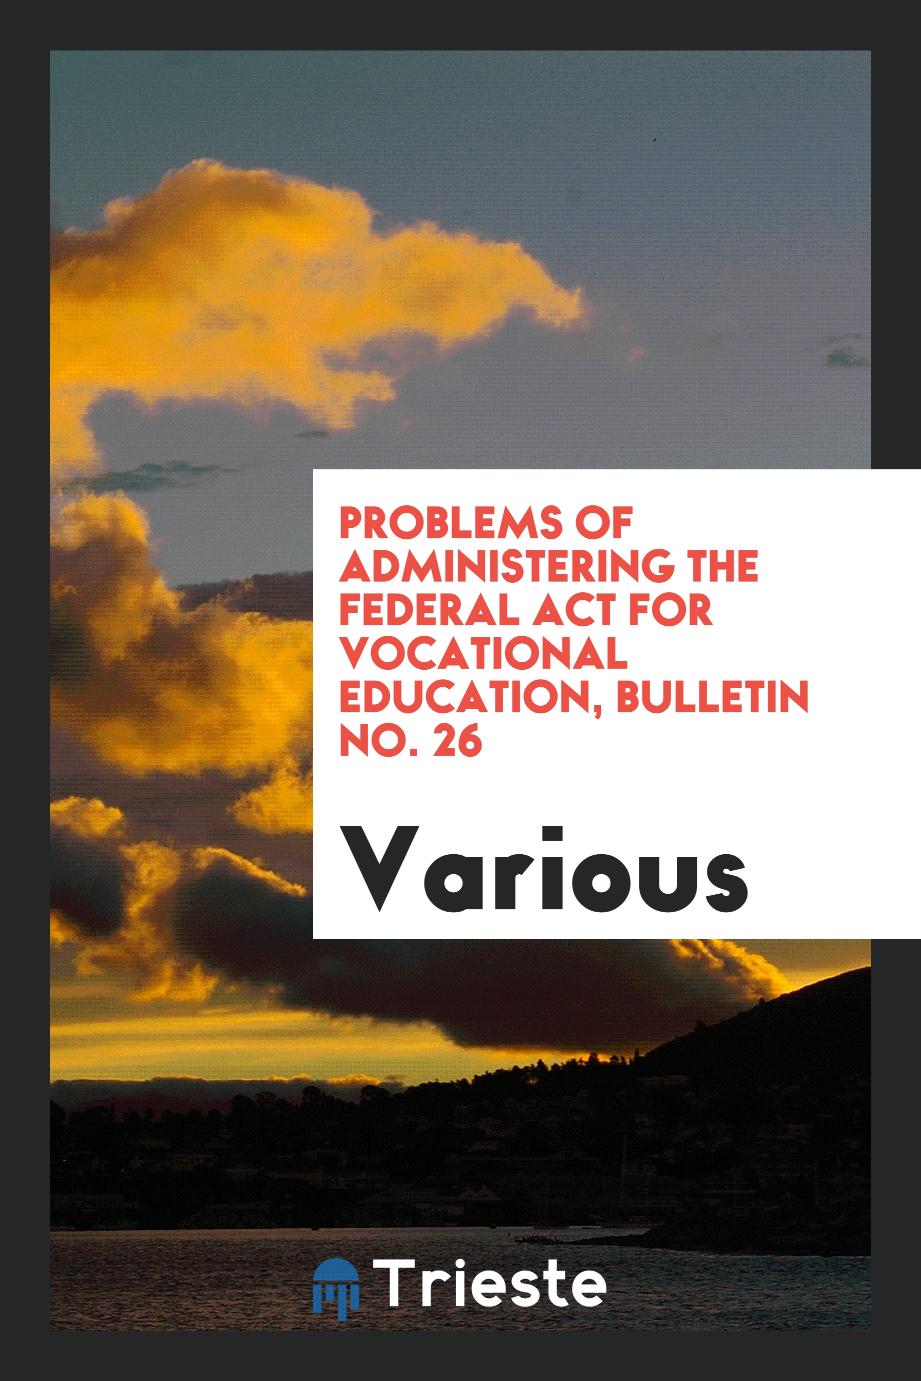 Problems of Administering the Federal Act for Vocational Education, Bulletin No. 26